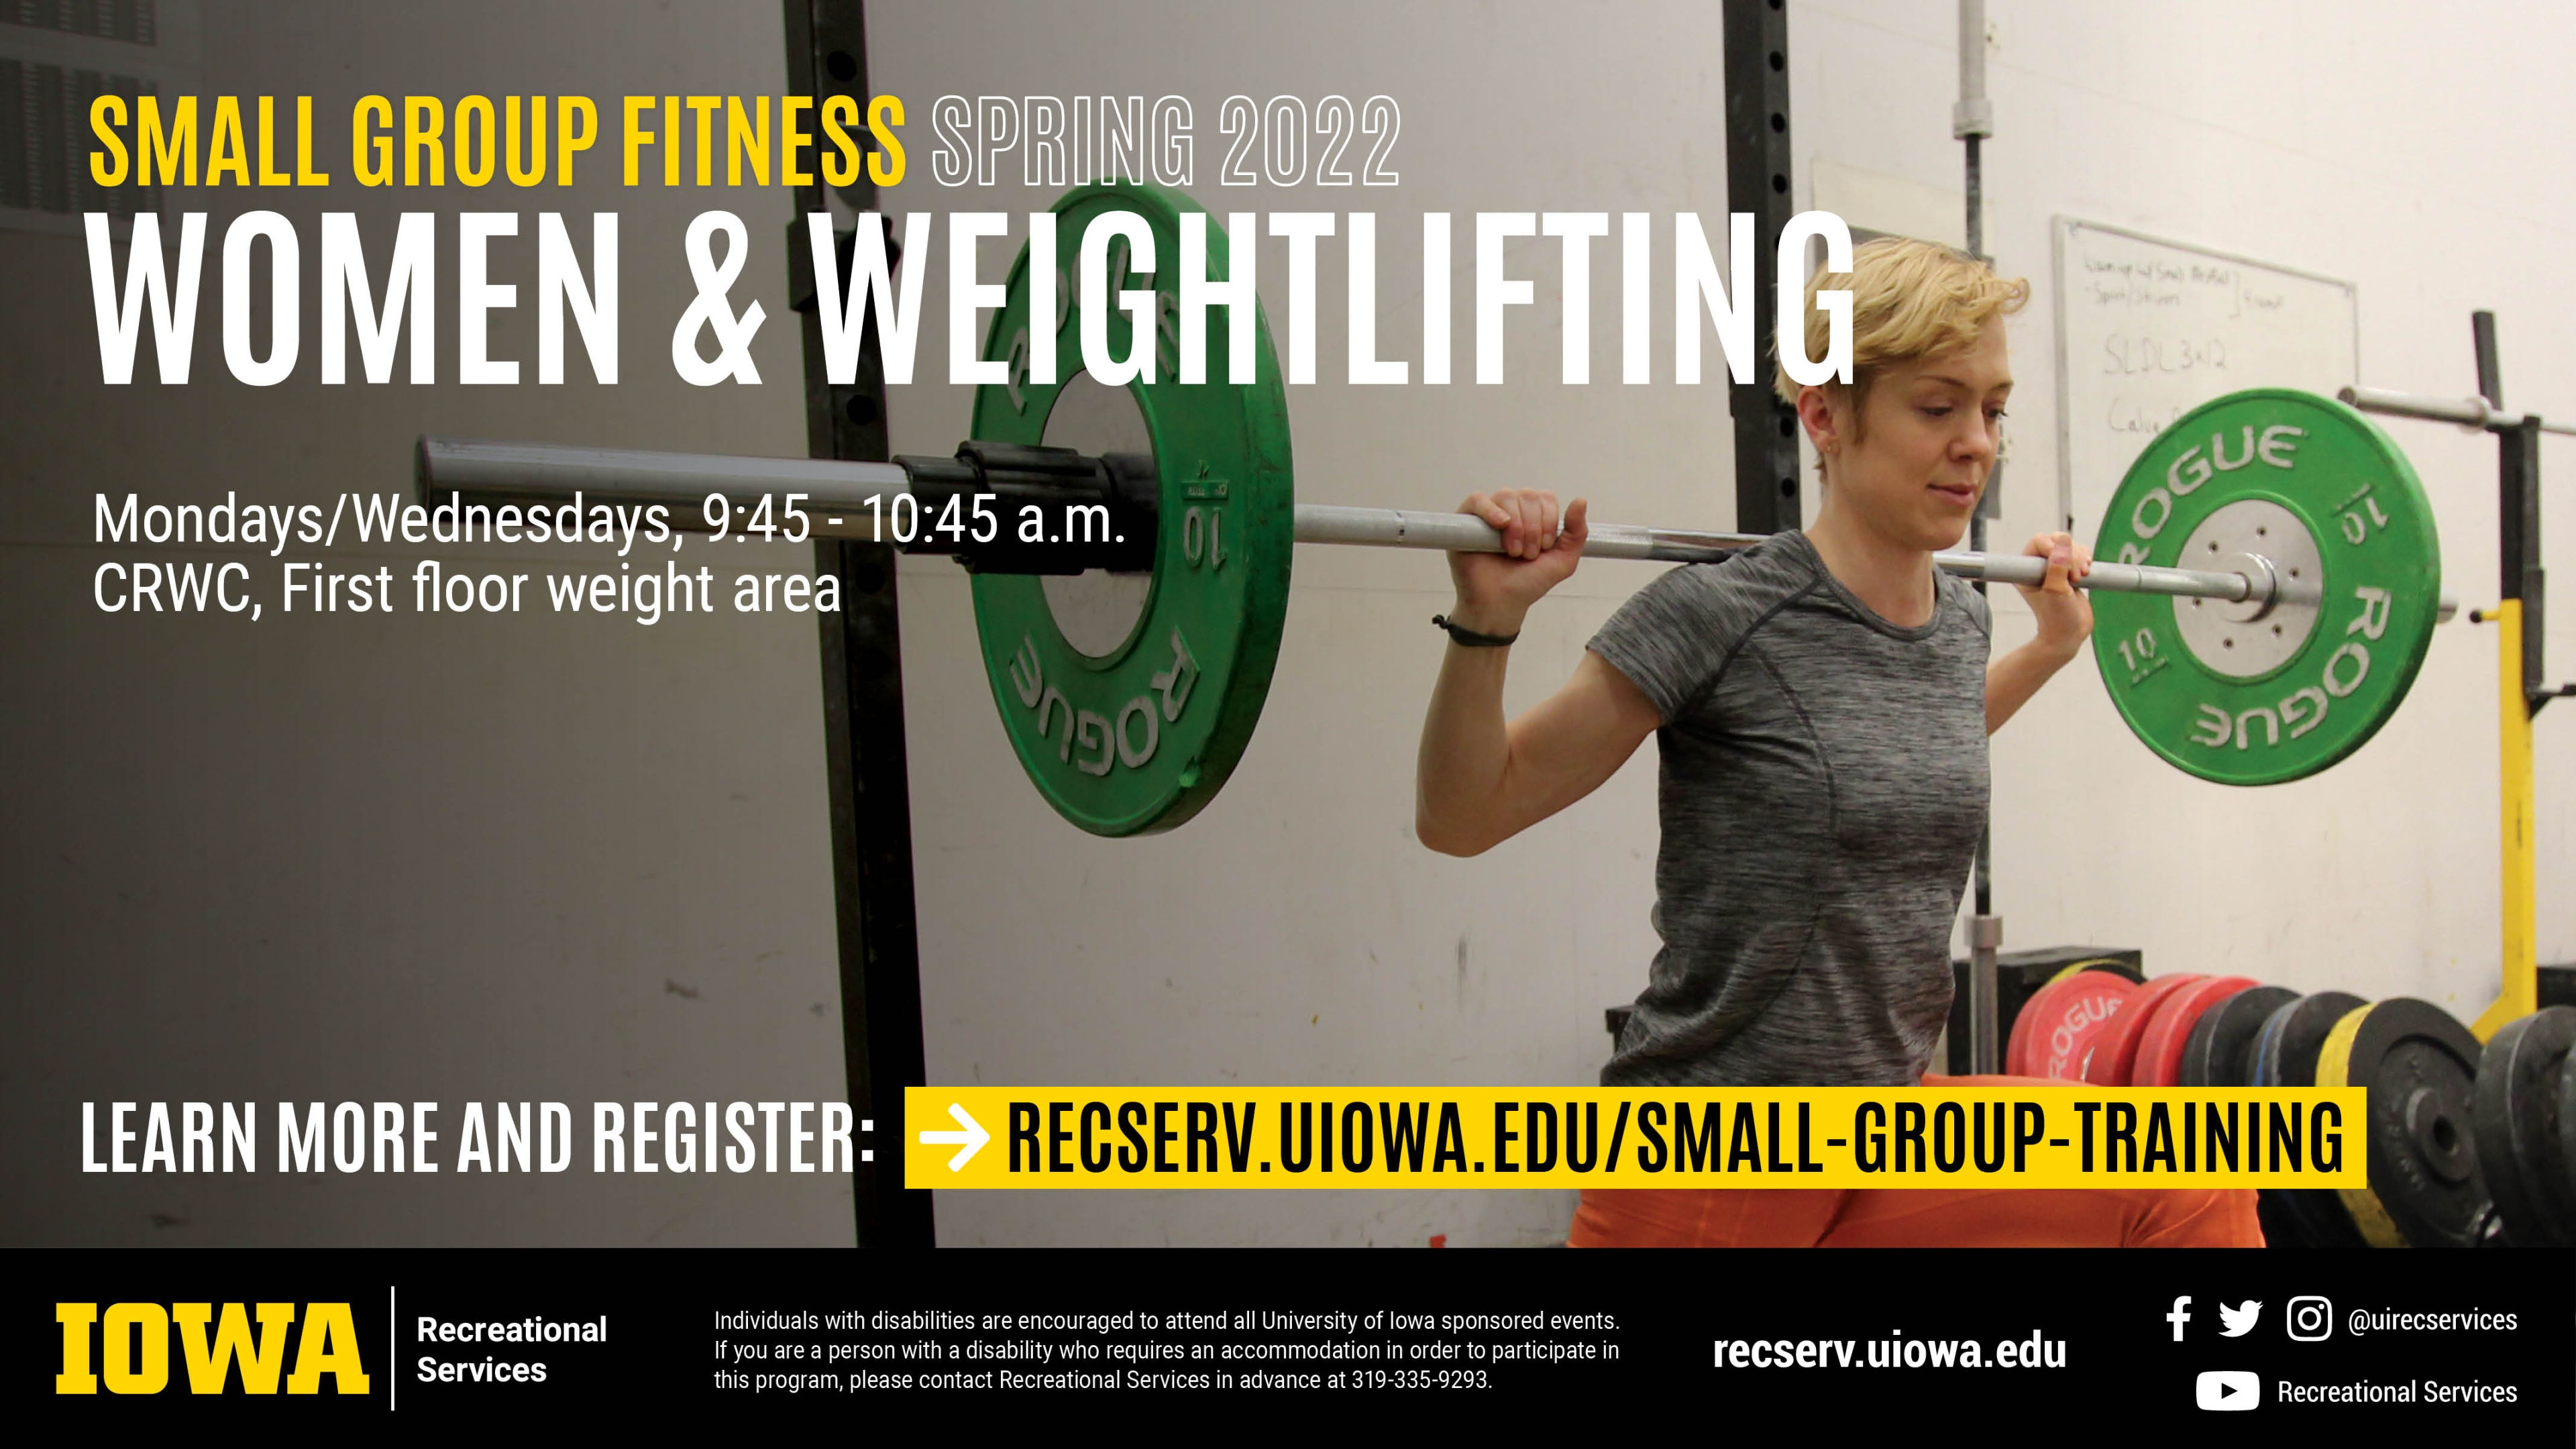 Small Group Fitness Spring 2022 Women & Weightlifting Mondays/Wednesdays, 5:30 - 6:30 pm. CRWC AR3 Wednesdays, 9:45 - 10:45 a.m. Learn more and register at recserv.uiowa.edu/small-group-training